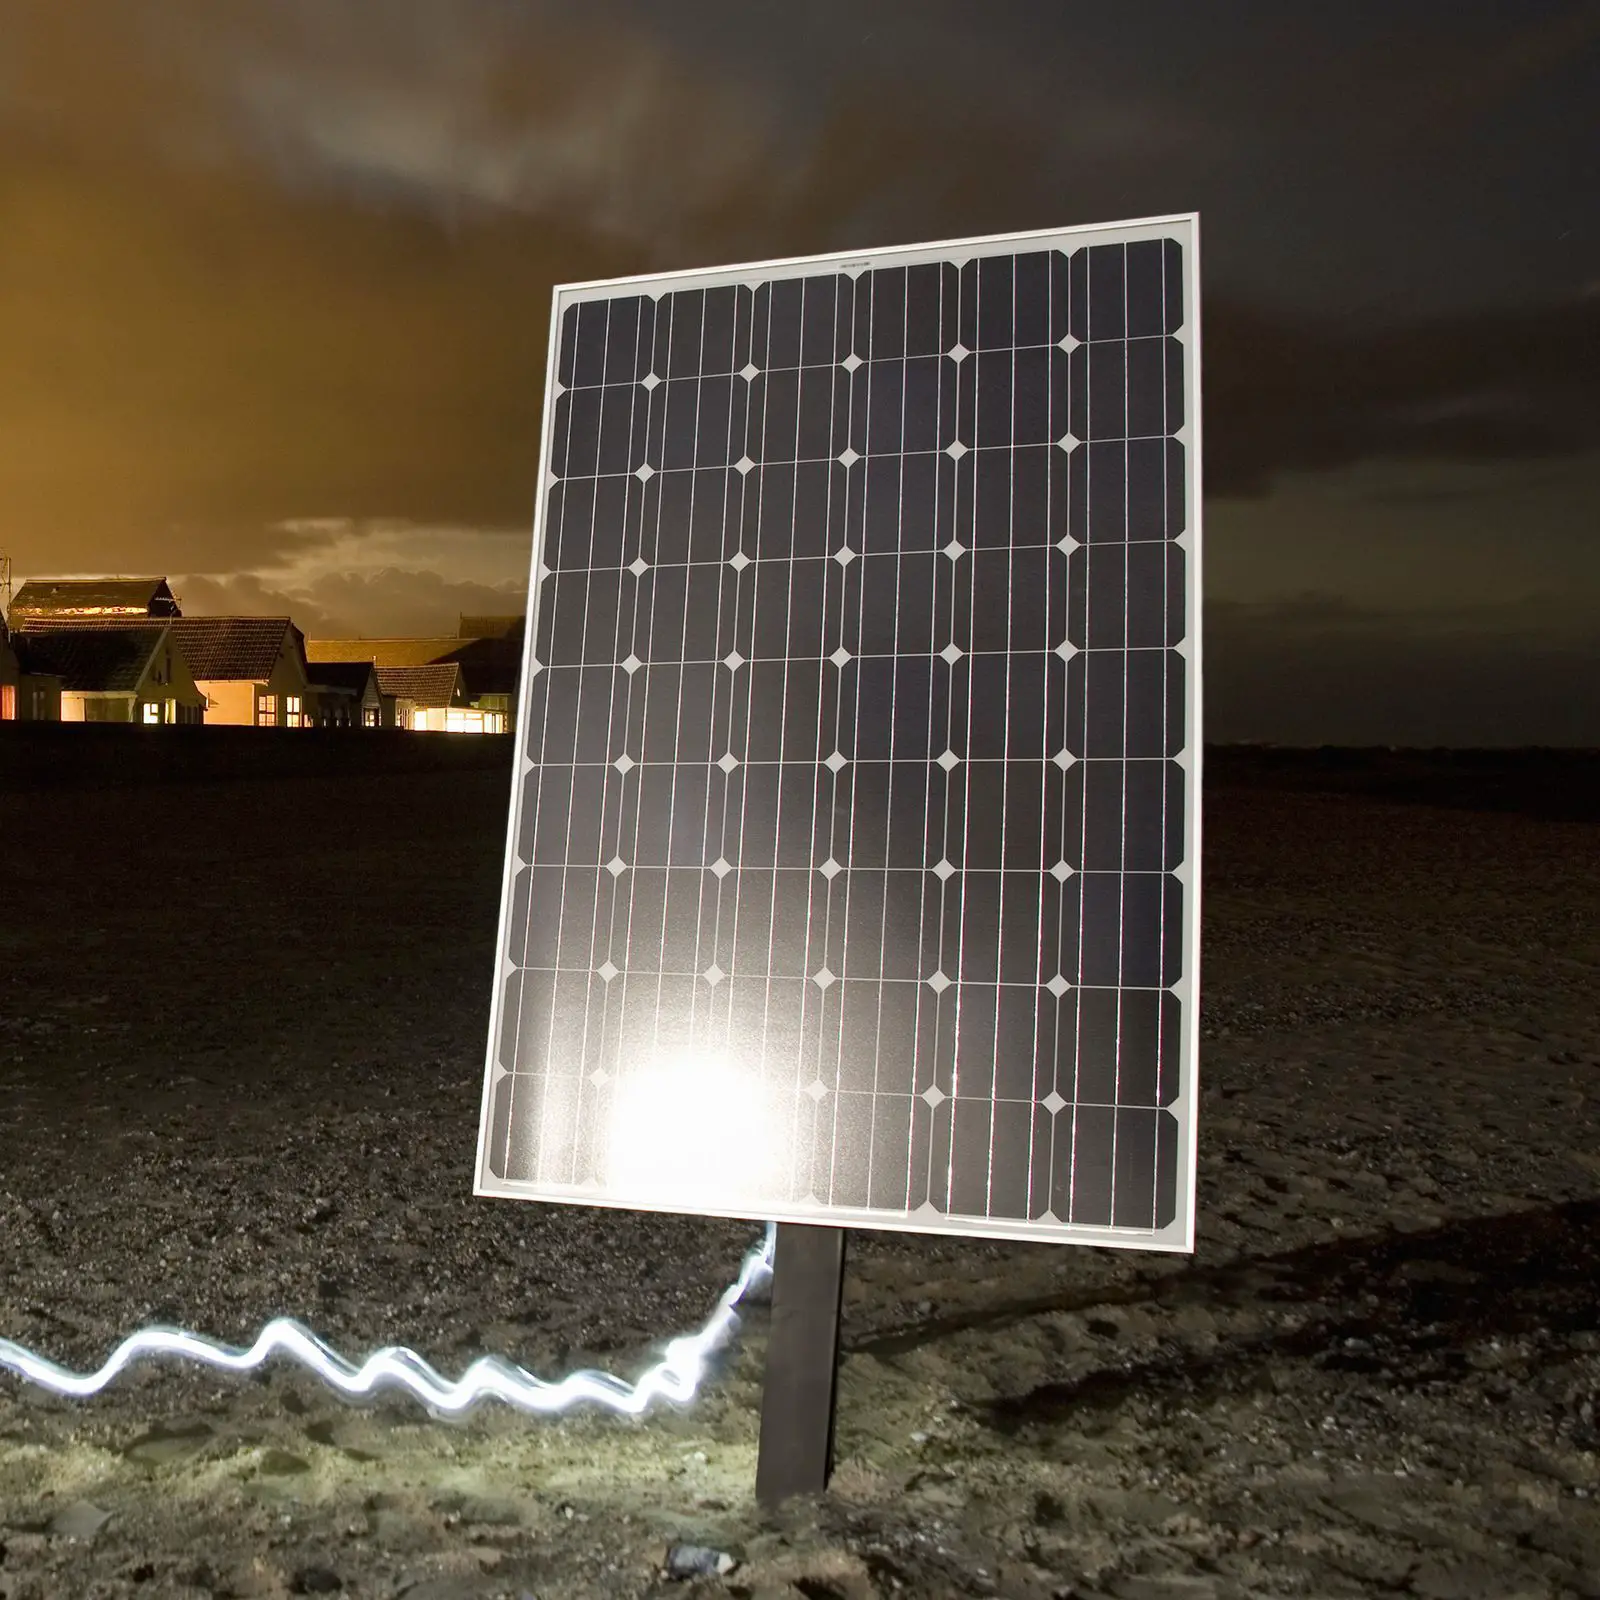 How Reverse Solar Panels Could Generate Power at Night